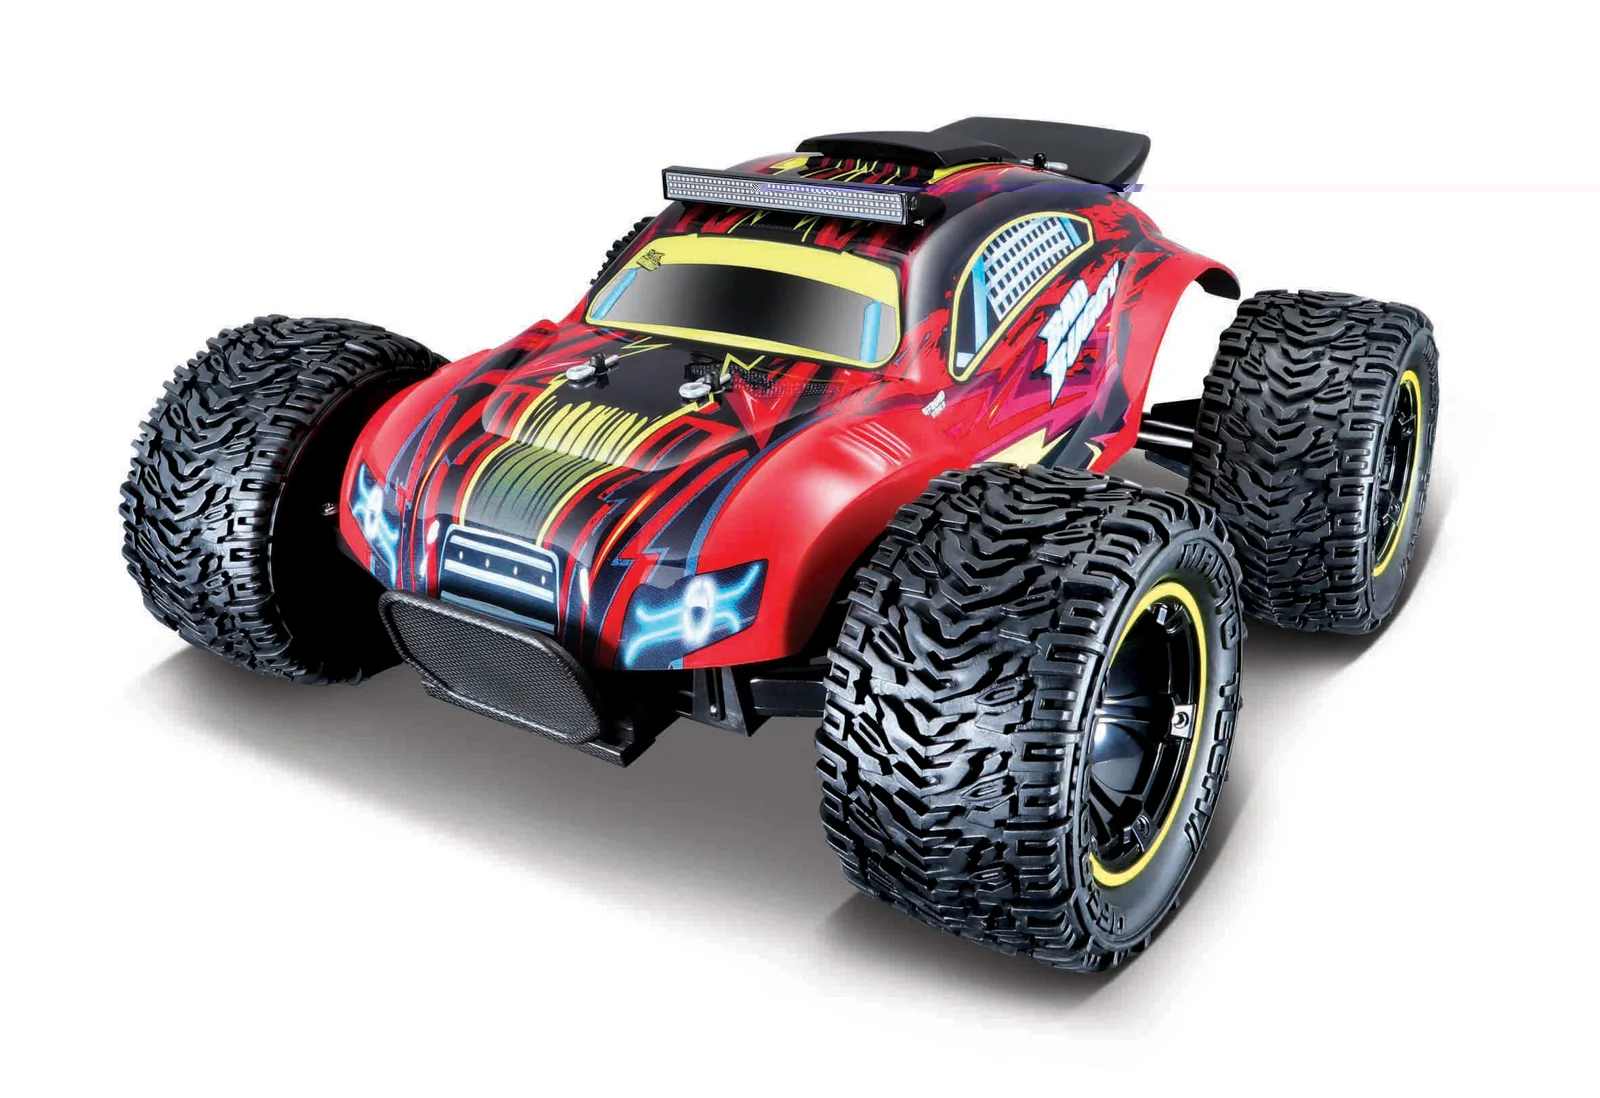 M. Tech RC, Bad Buggy, 2,4 Ghz